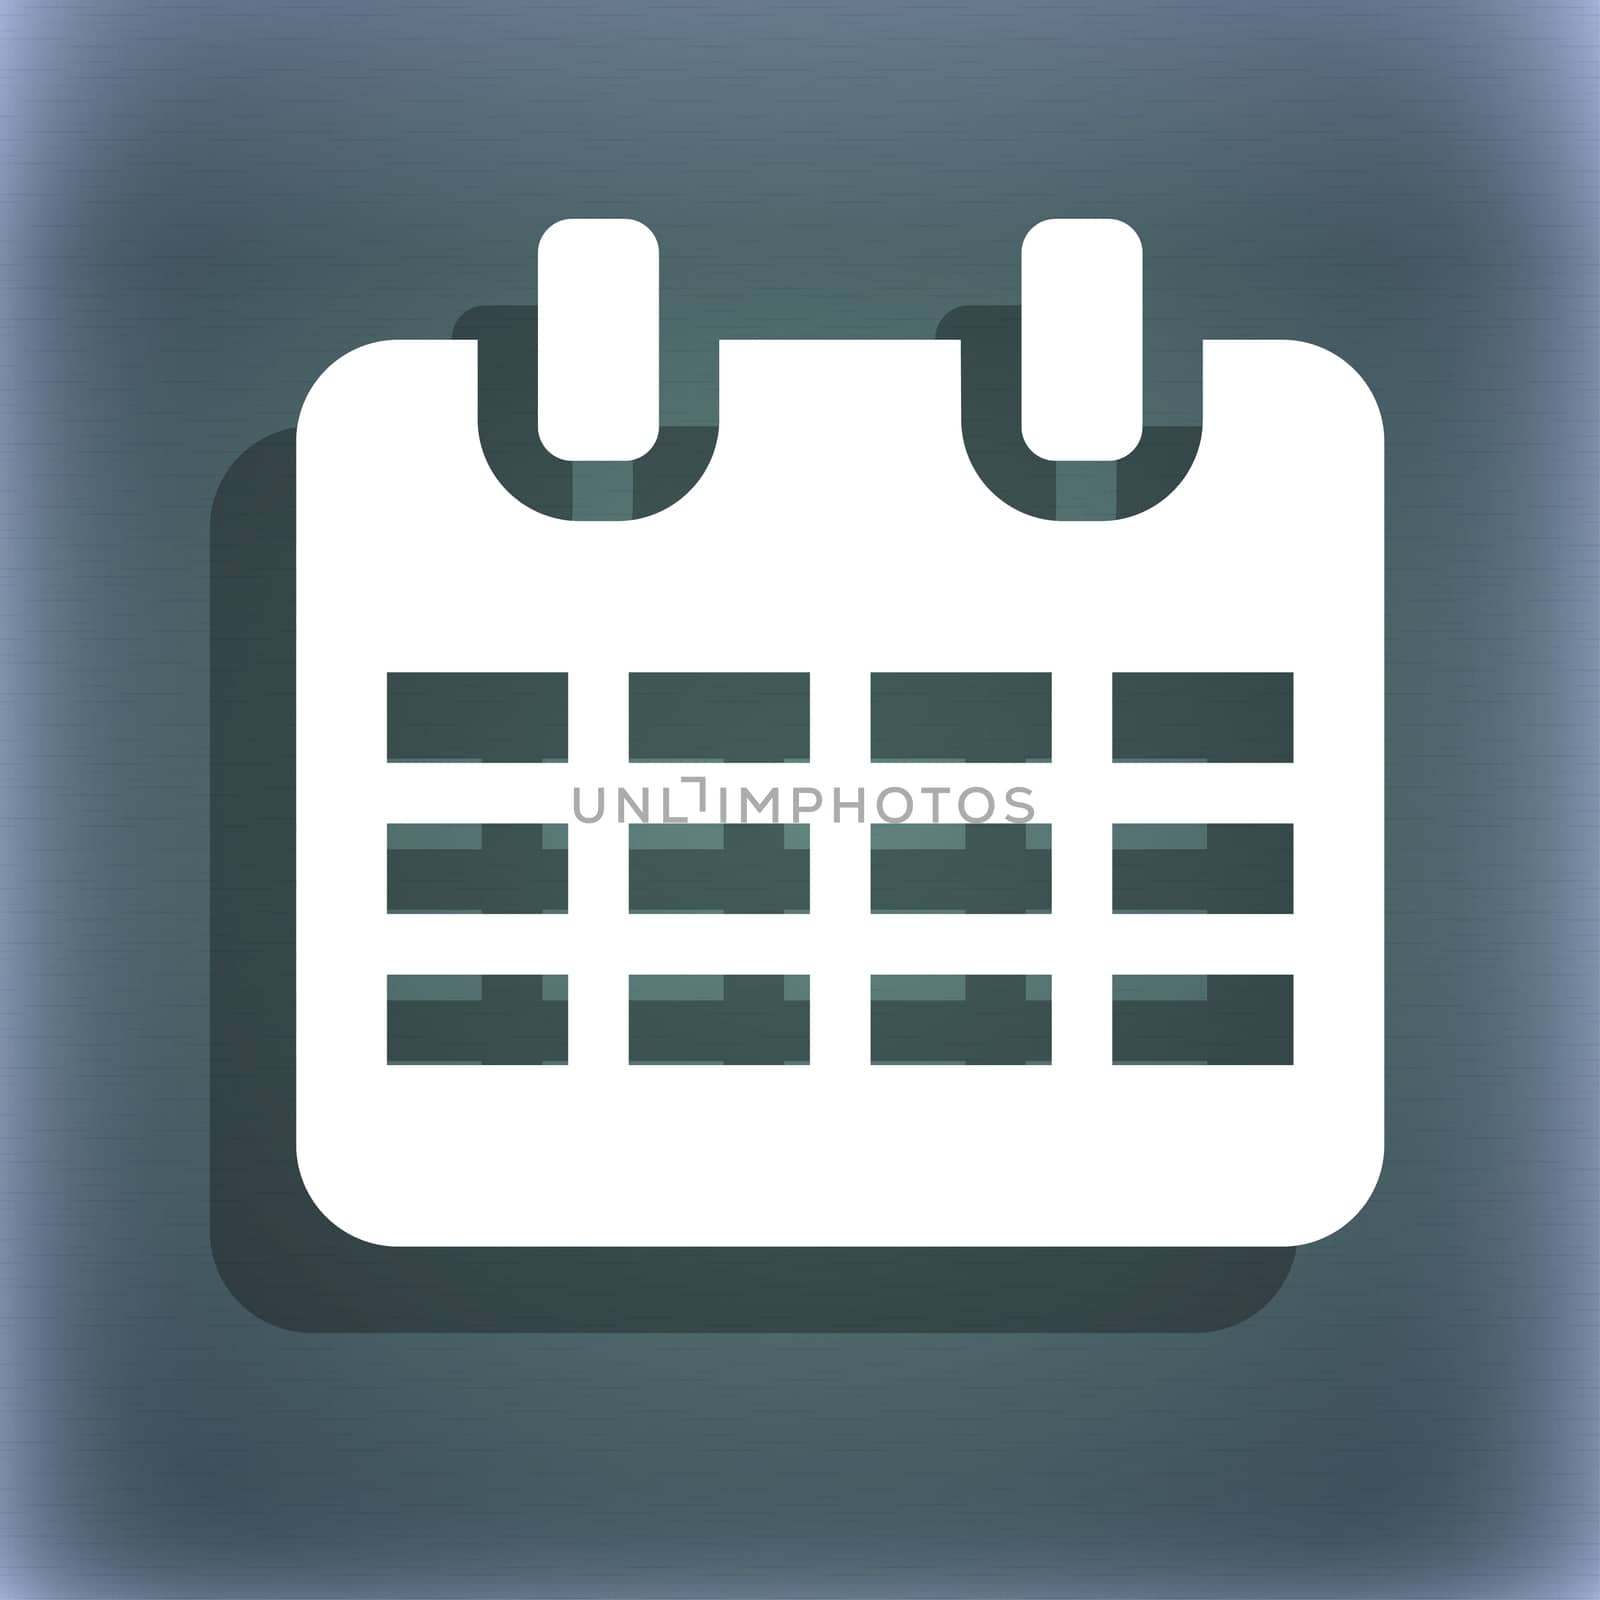  Calendar, Date or event reminder  icon symbol on the blue-green abstract background with shadow and space for your text. illustration